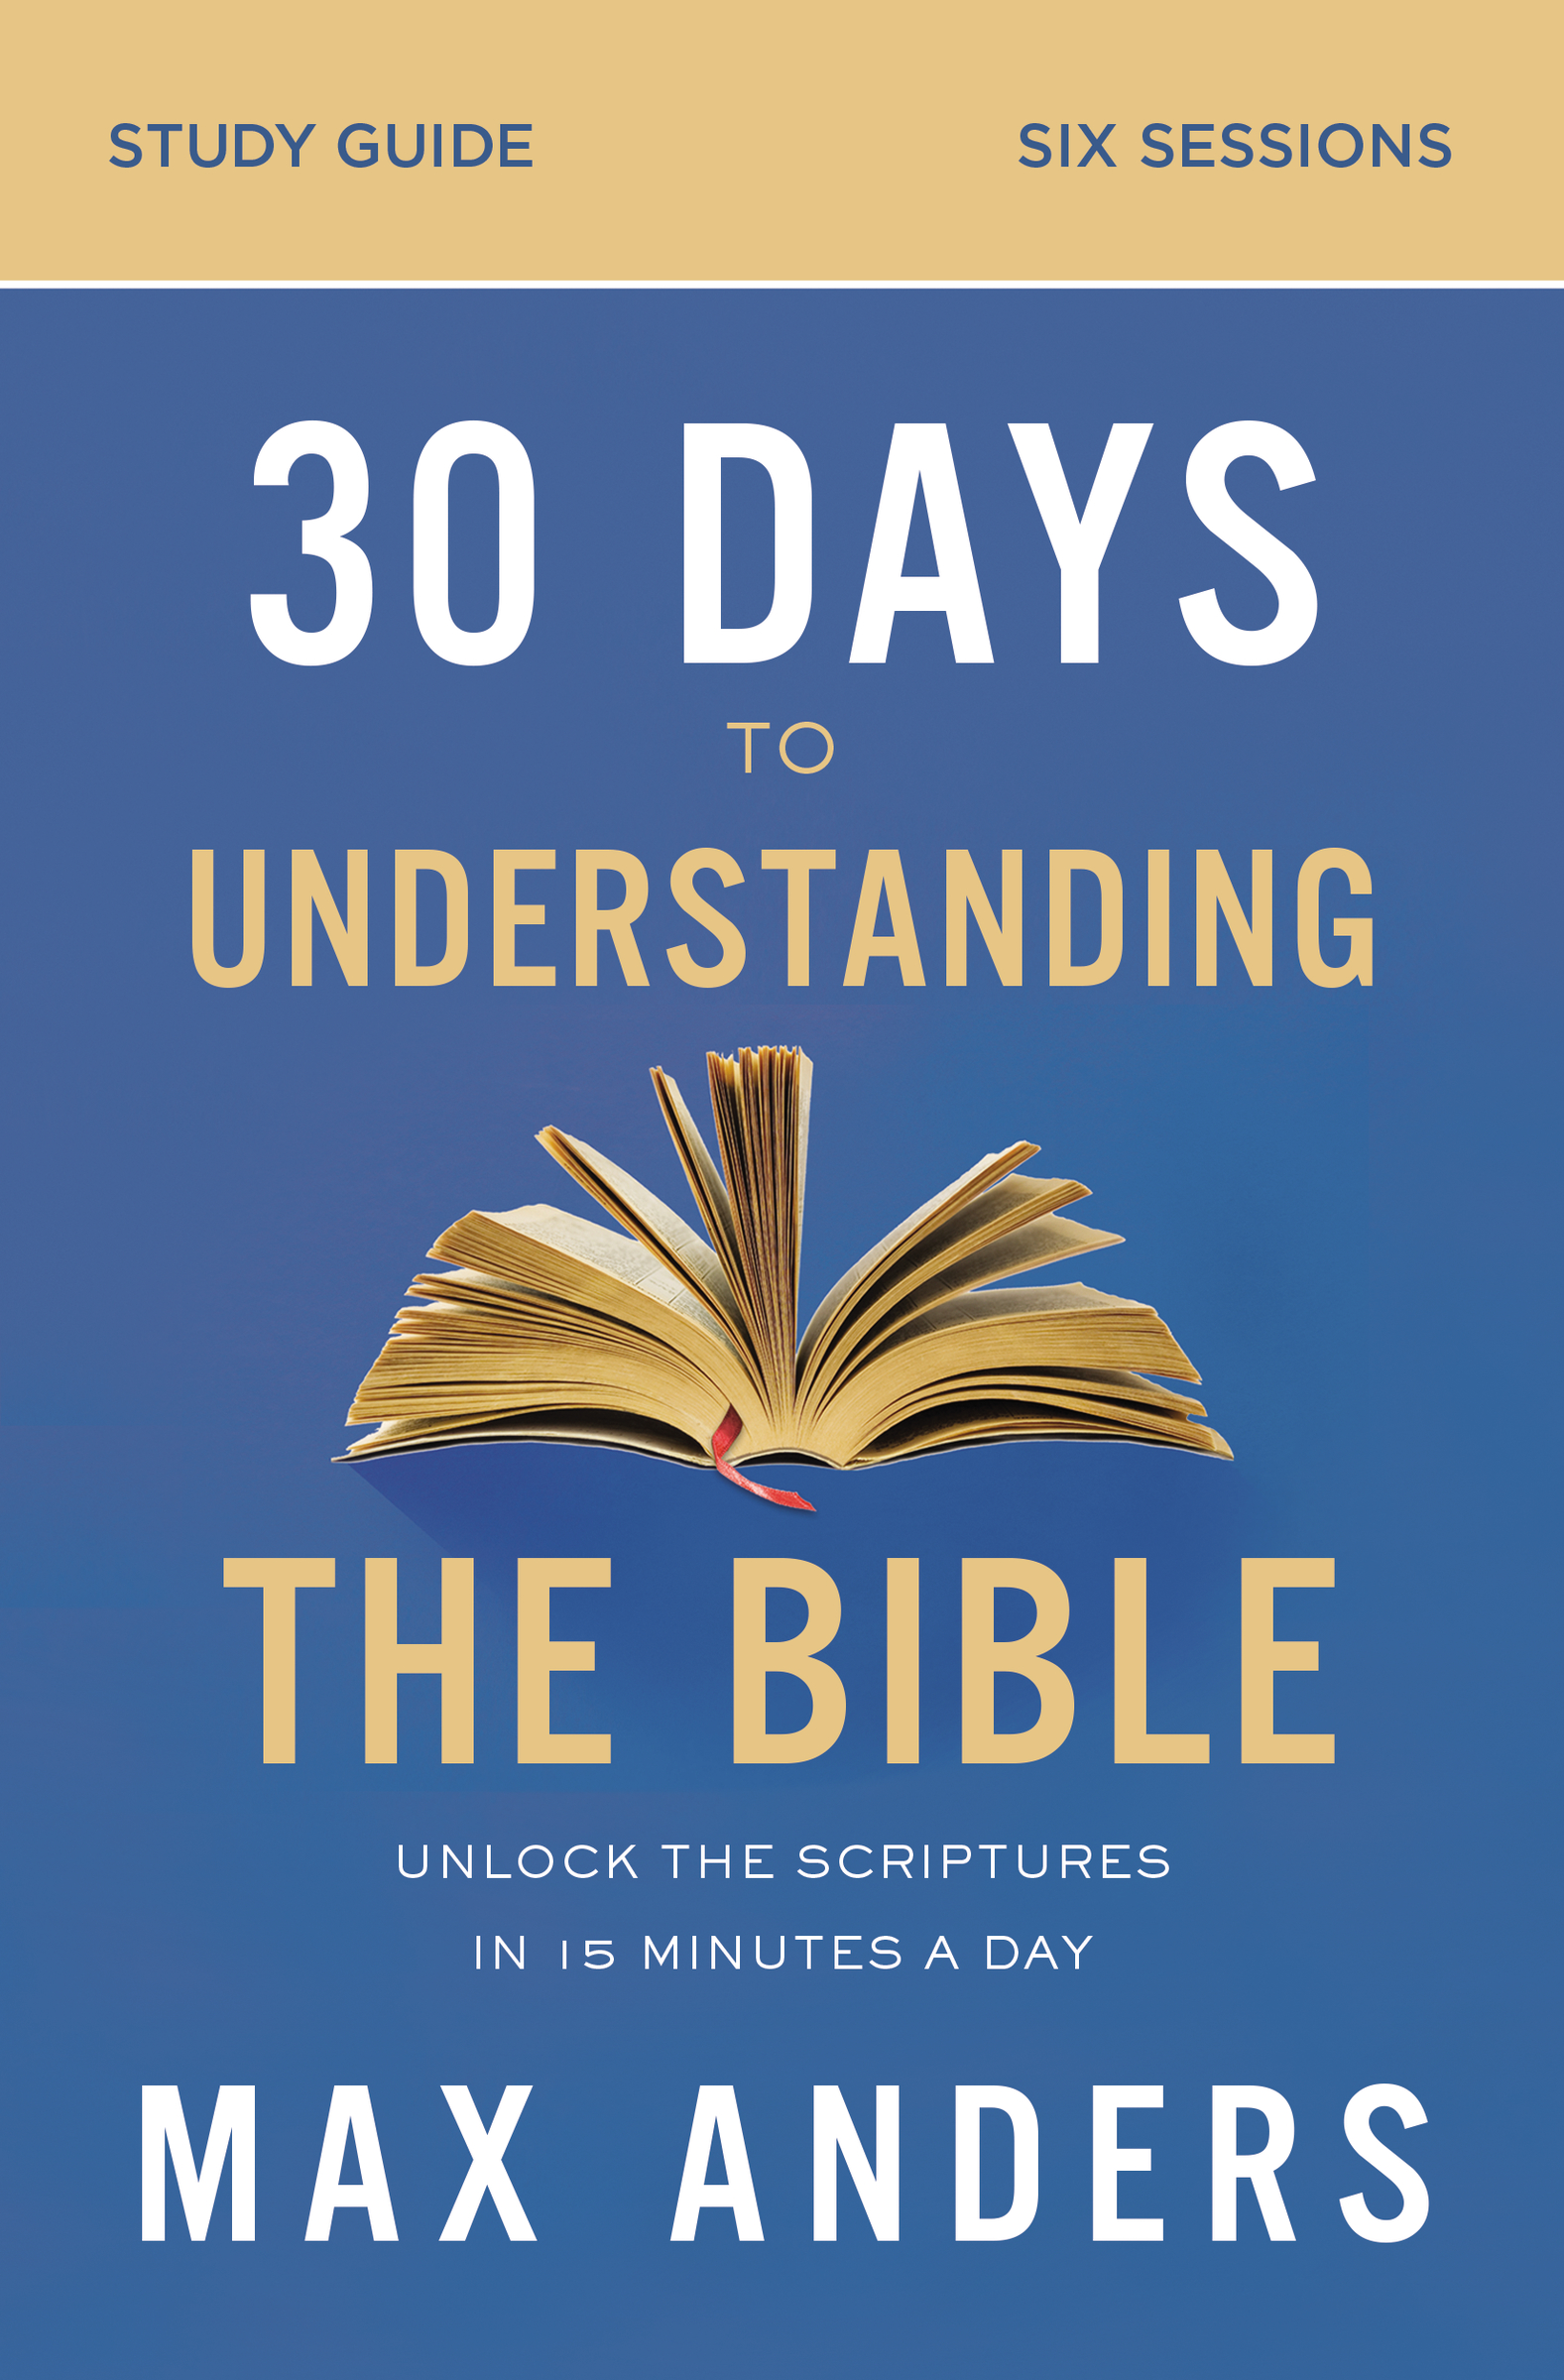 30 Days to Understanding the Bible Study Guide Unlock the Scriptures in 15 Minutes a Day cover image